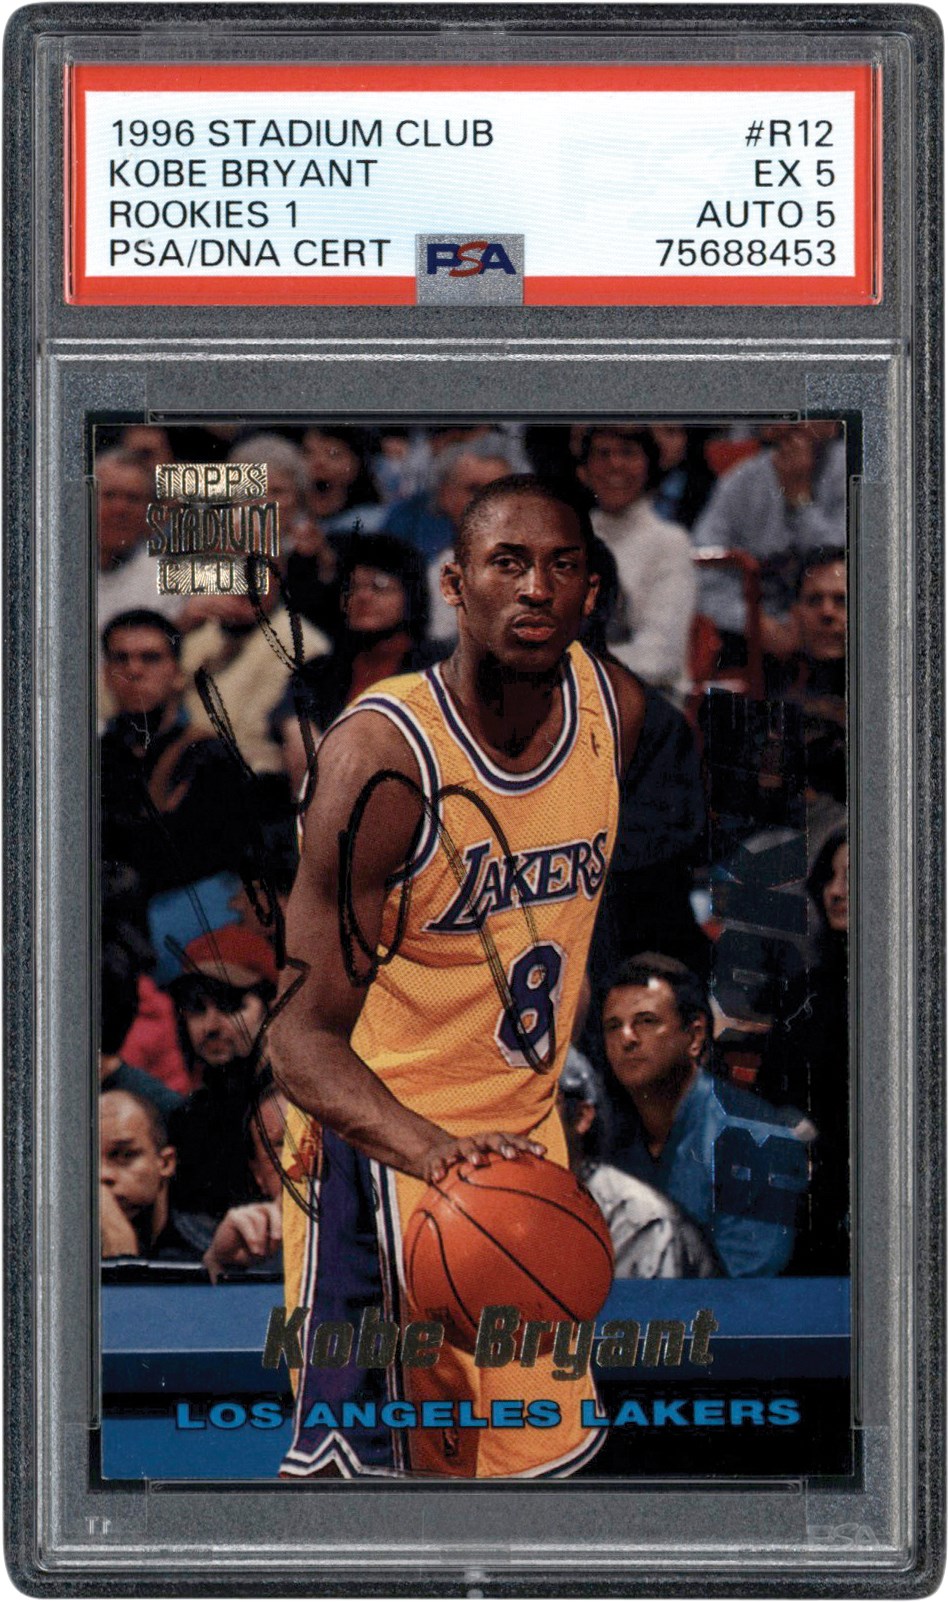 - 1996 Stadium Club #R12 Kobe Bryant Rookies 1 Signed Rookie Card PSA EX 5 Auto 5 (One of Two Known Examples)